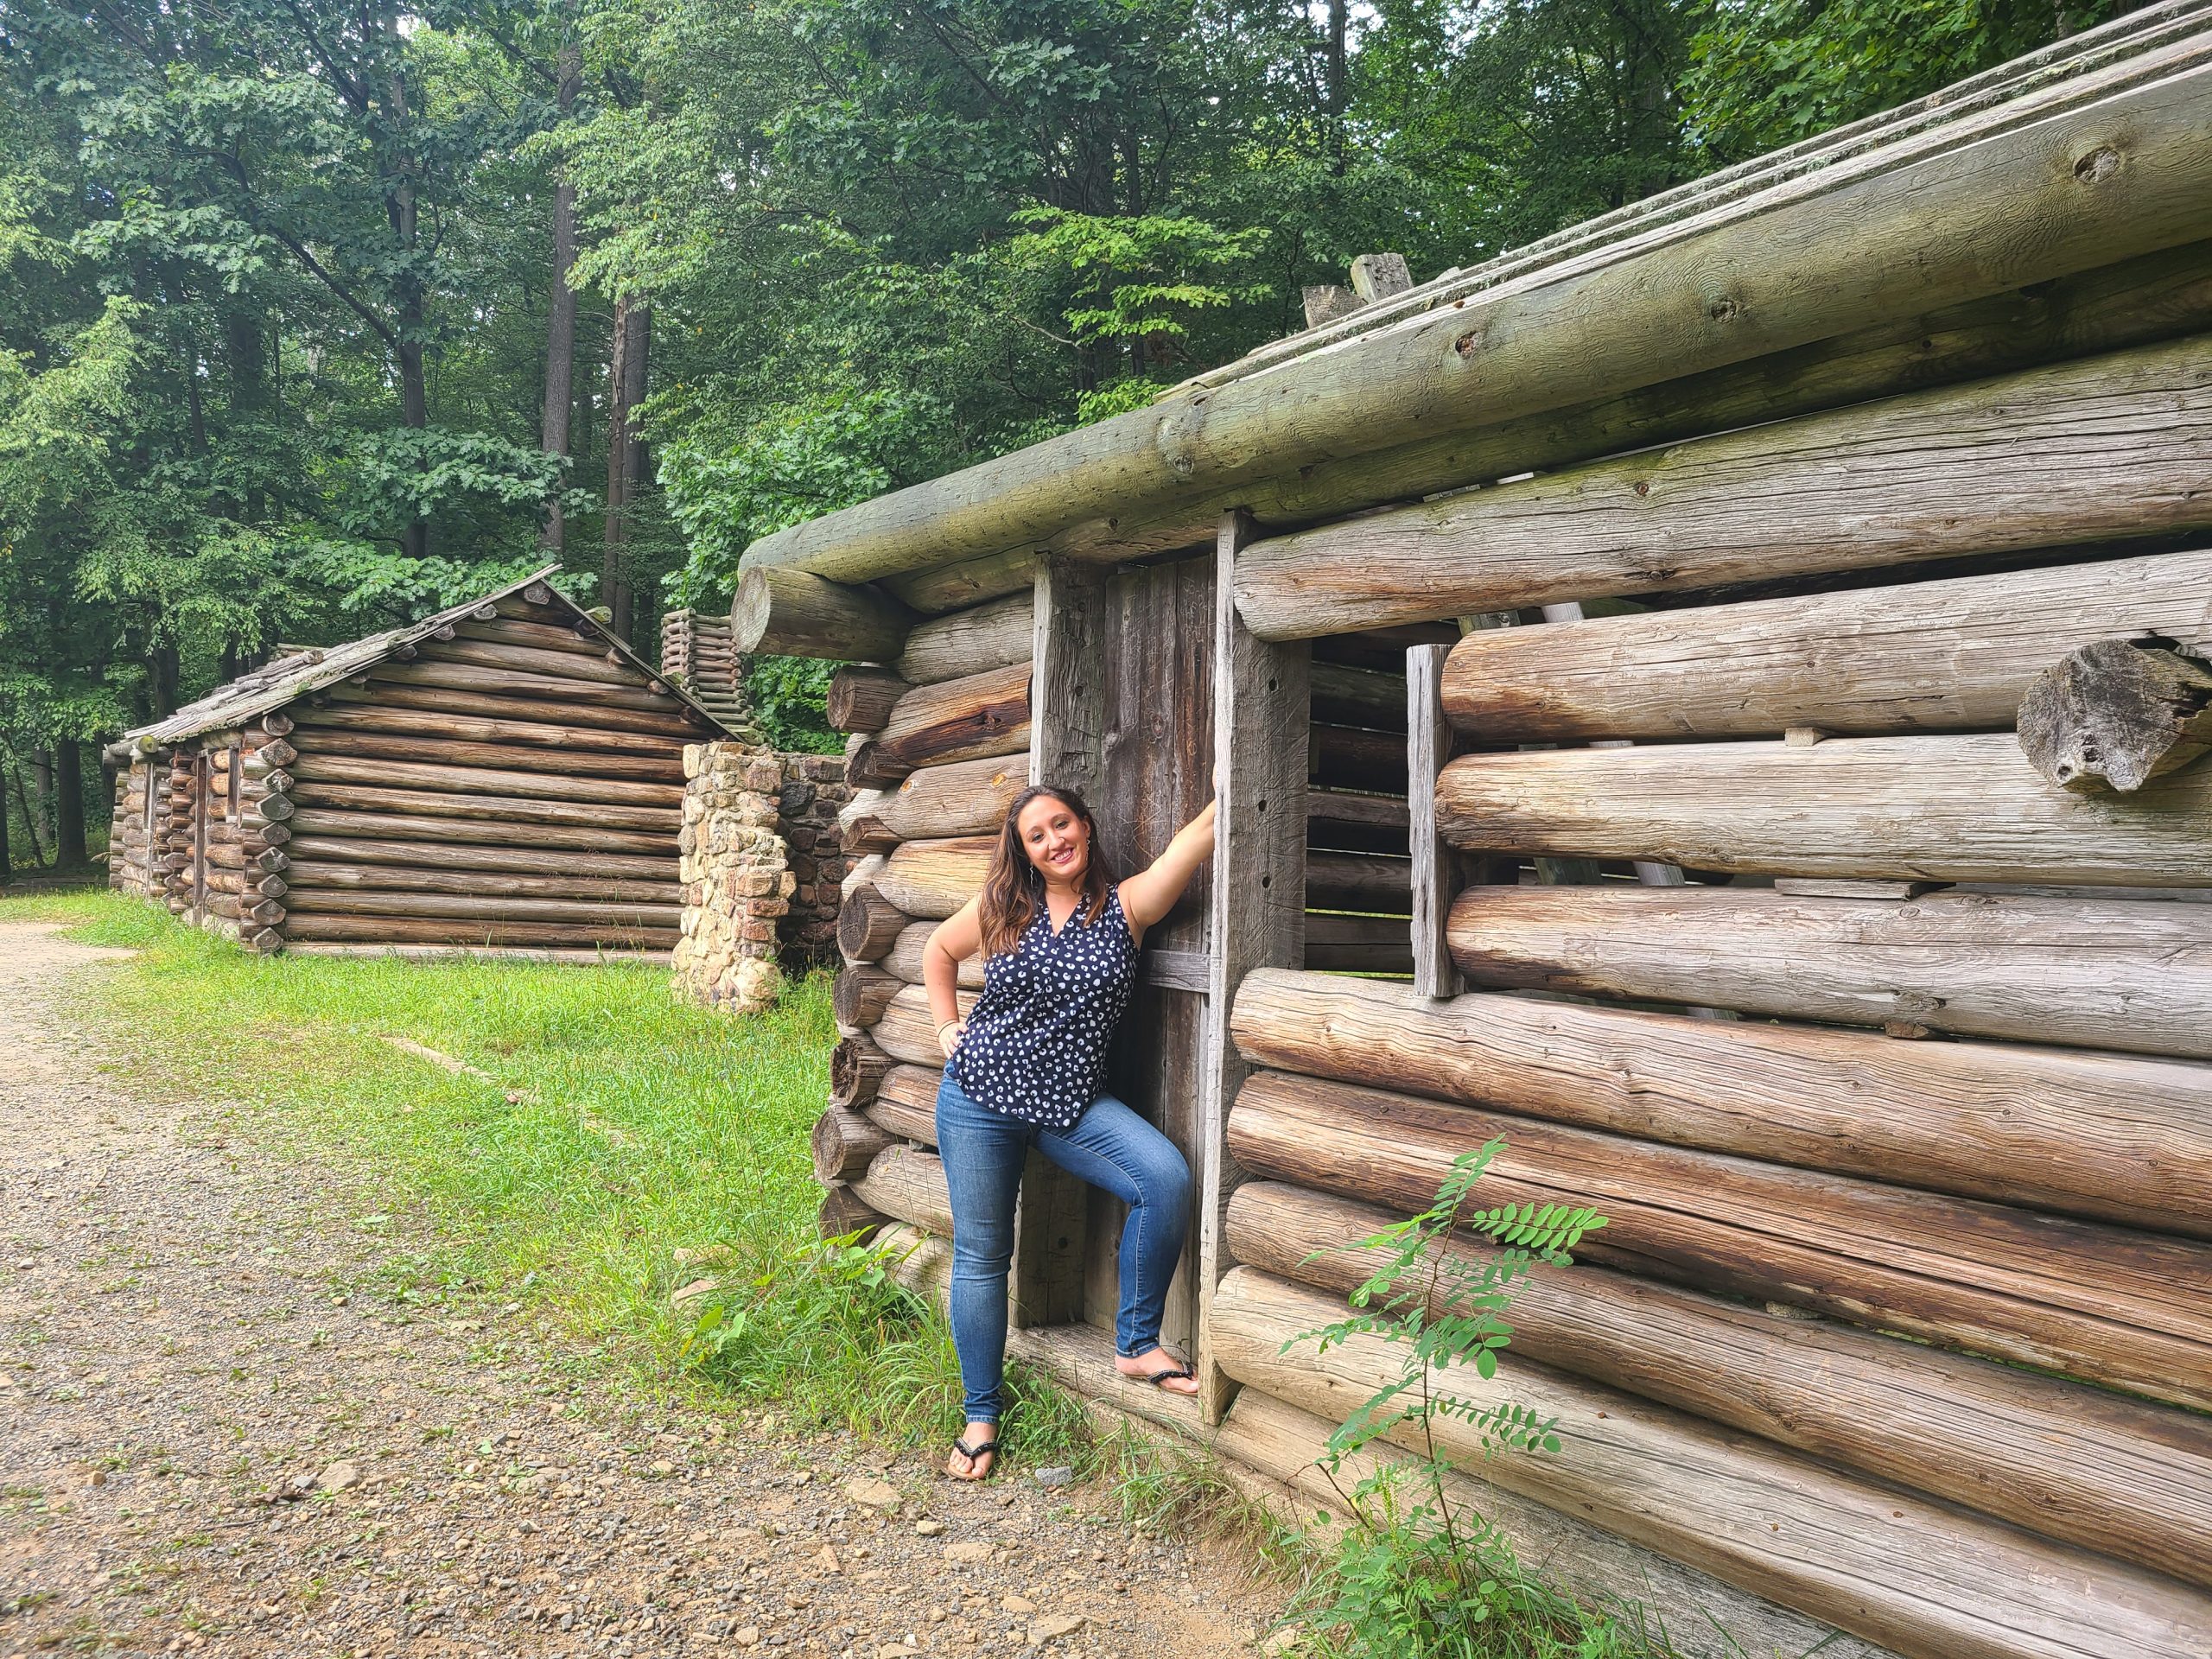 A woman poses next to a recreation of a cabin in Jockey Hollow Park